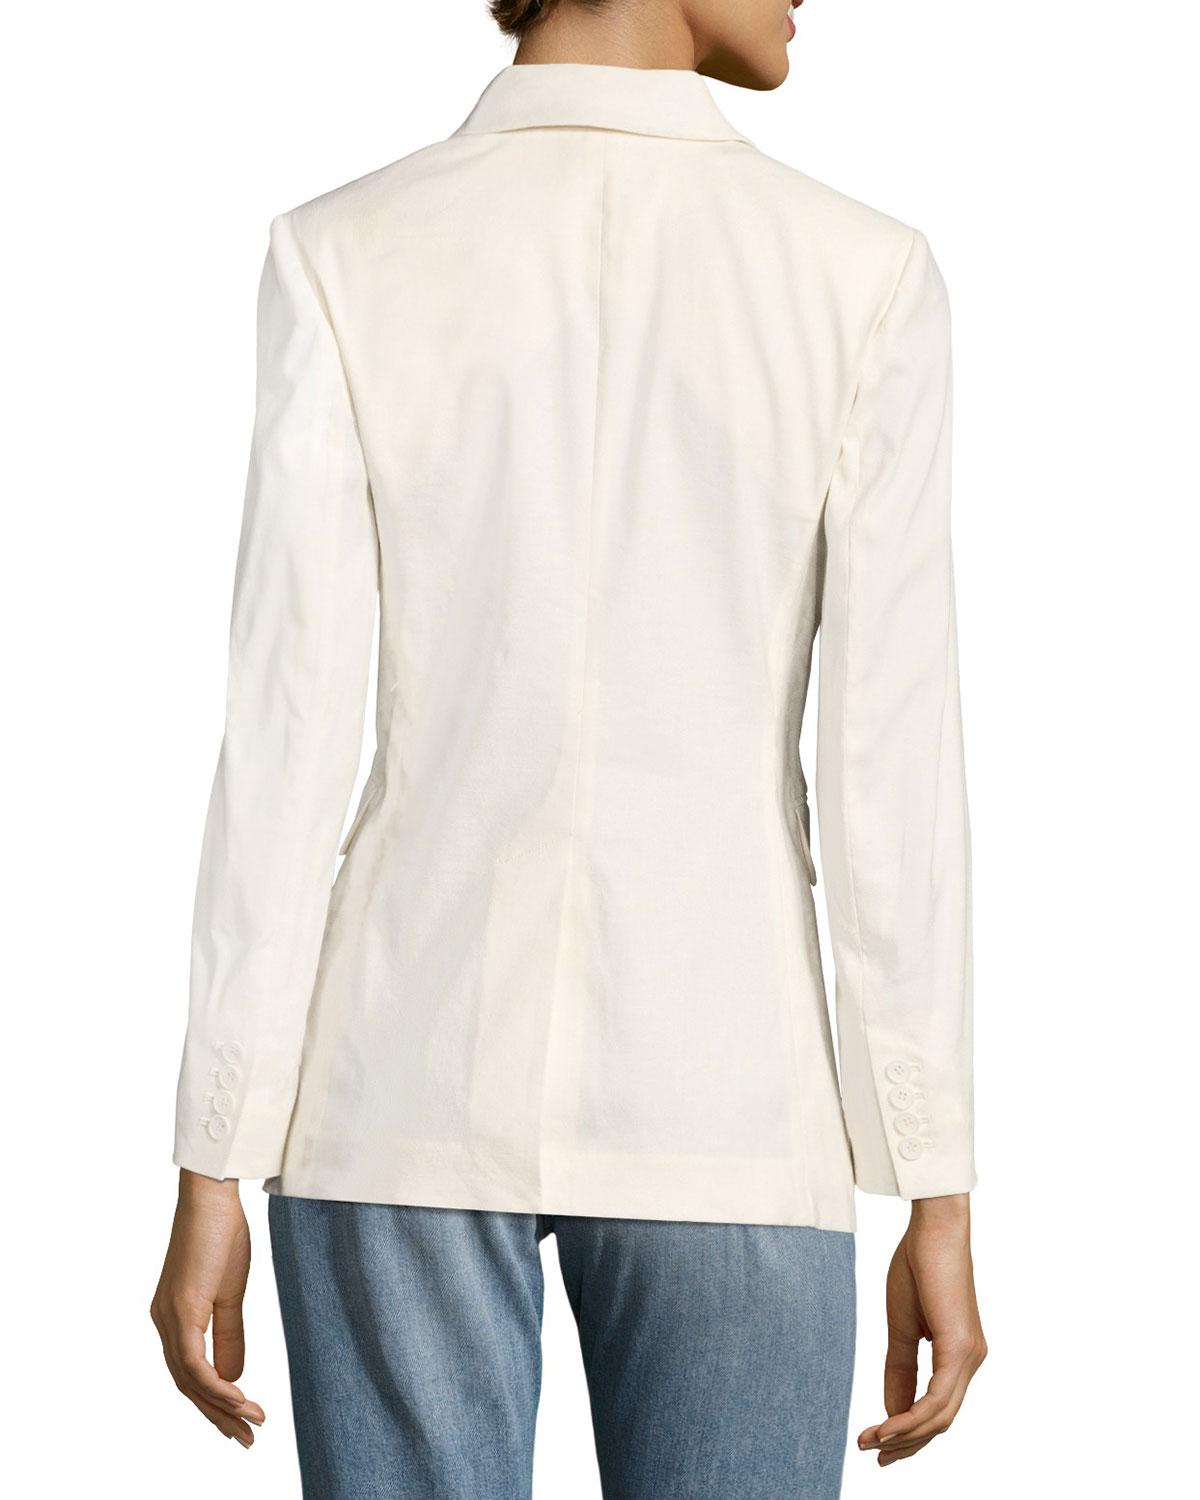 Lyst - Theory Etiennette Elongated Stretch Linen Blazer in White